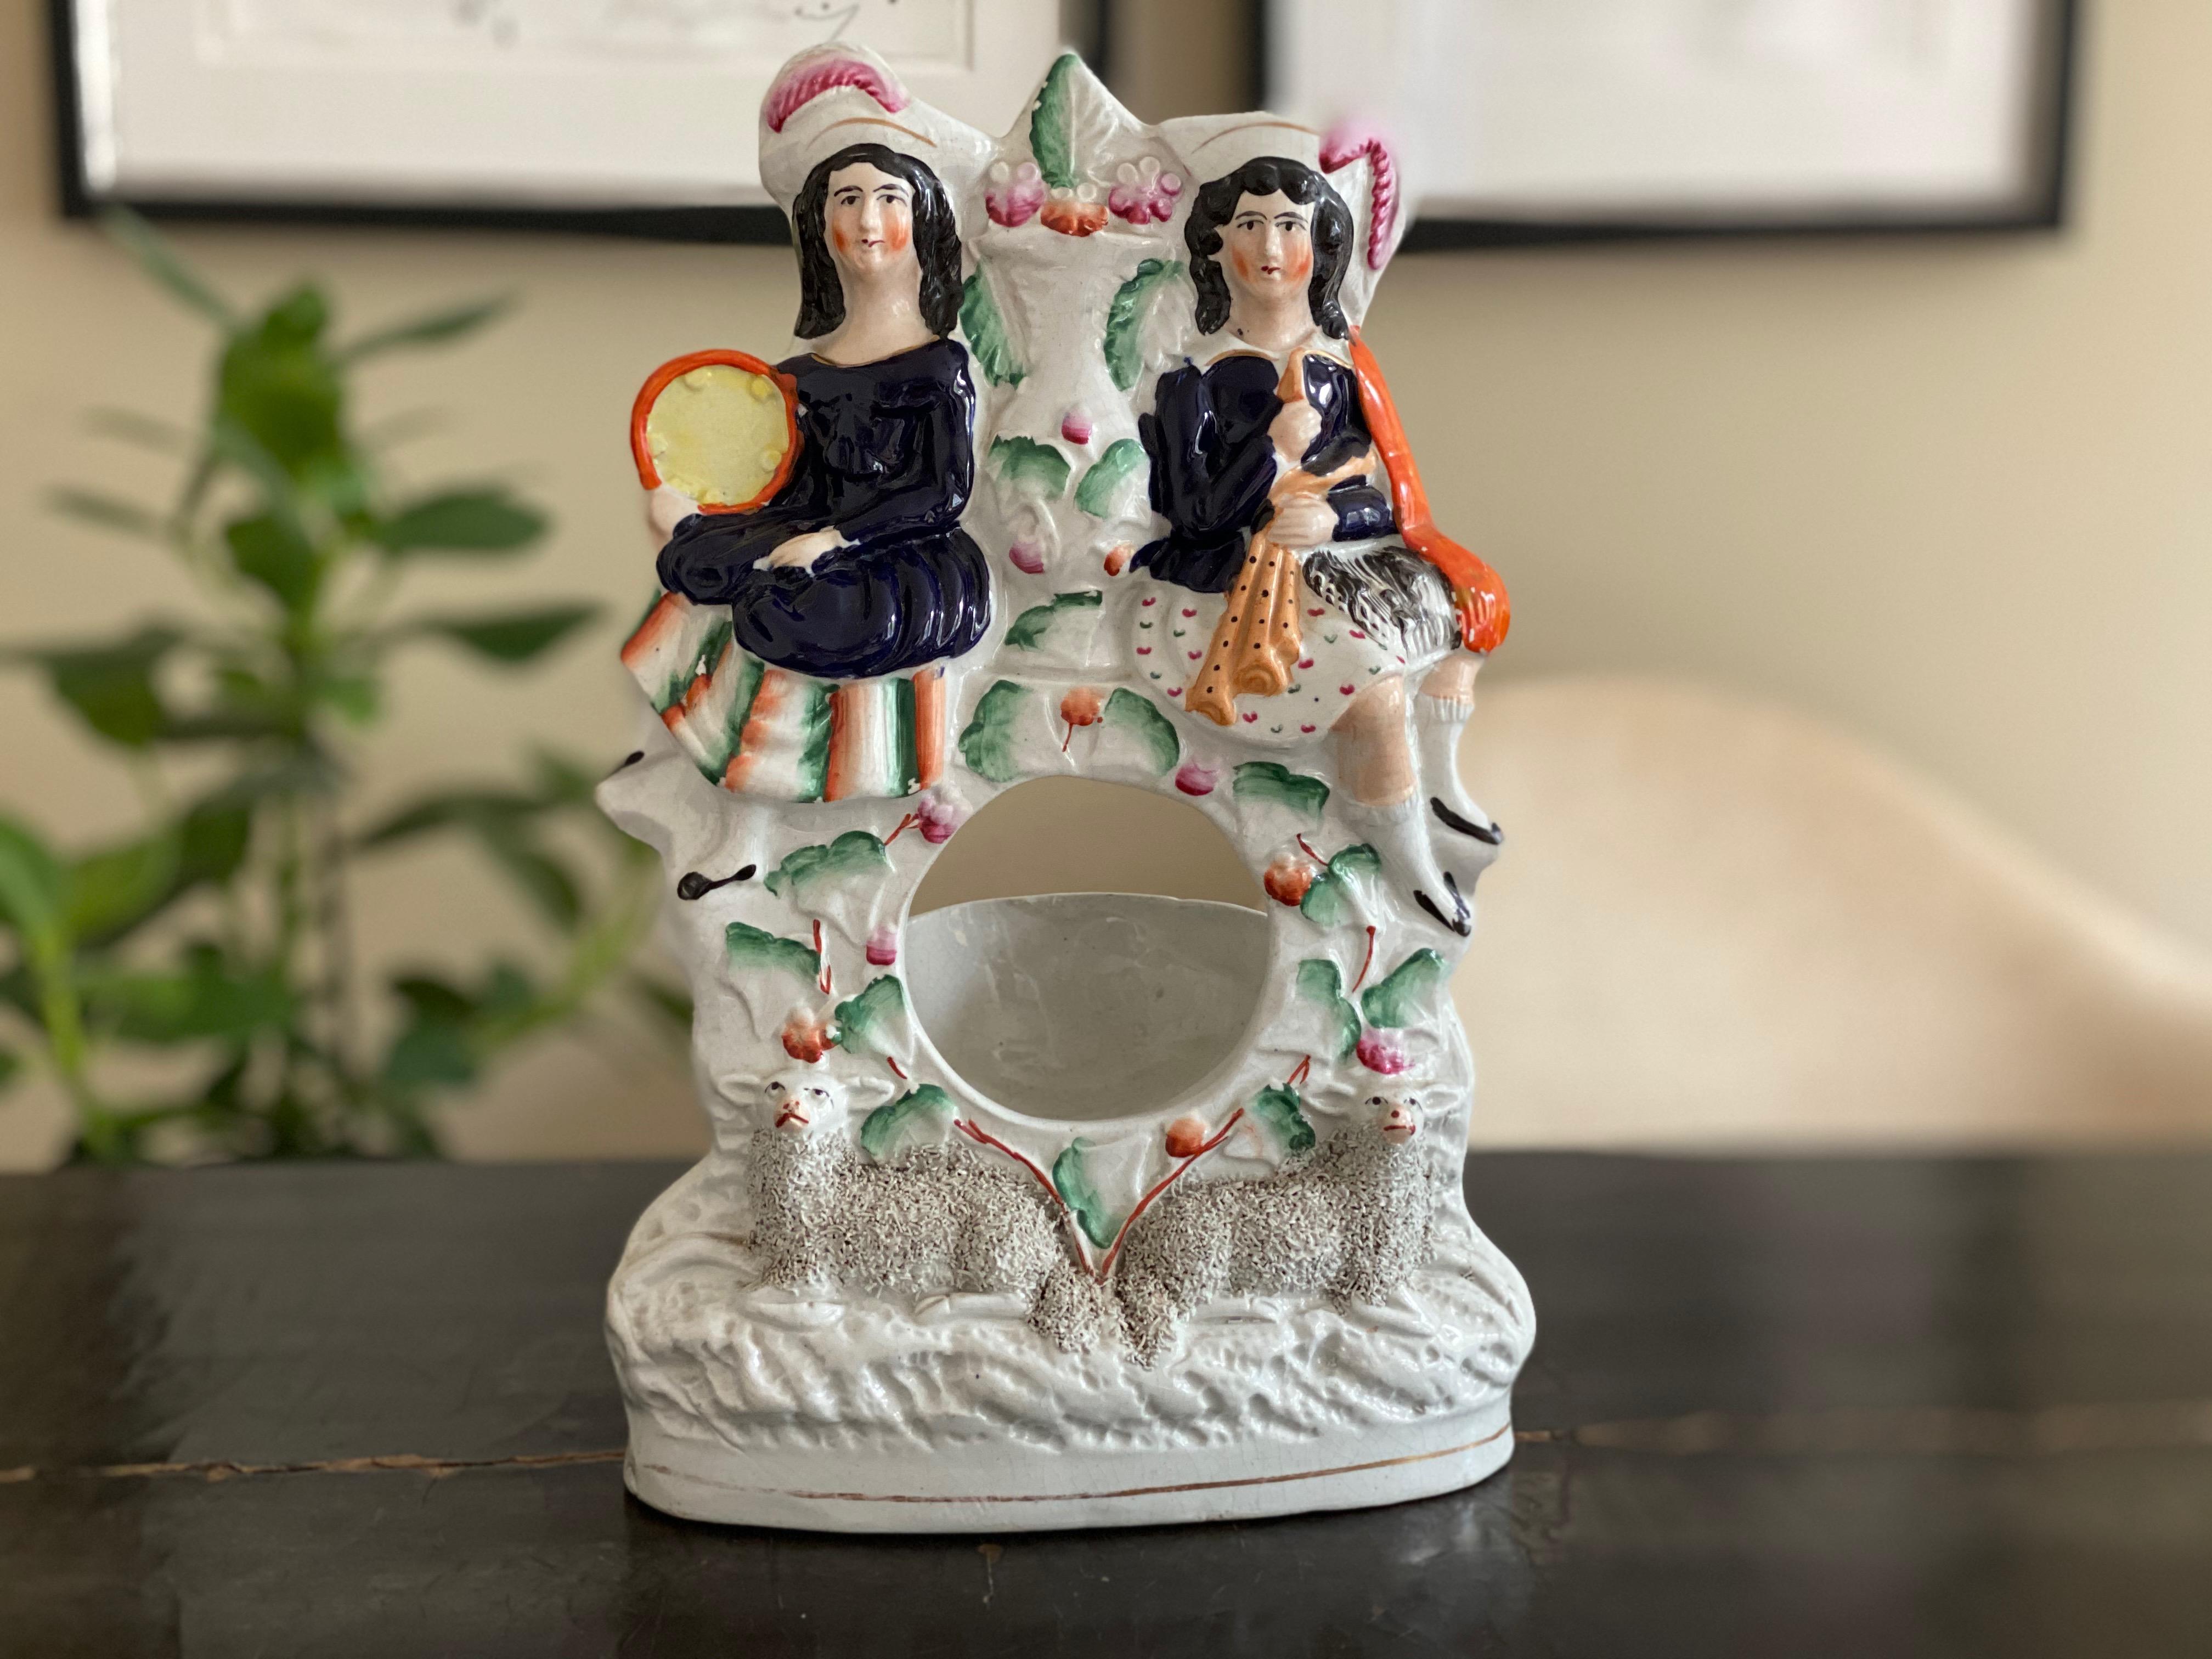 Staffordshire figurines are a kind of popular ceramic figurines that were made in England from the 18th century onwards. Most Staffordshire figurines made between 1740 and 1900 were produced by small potteries, and manufacturer's details are